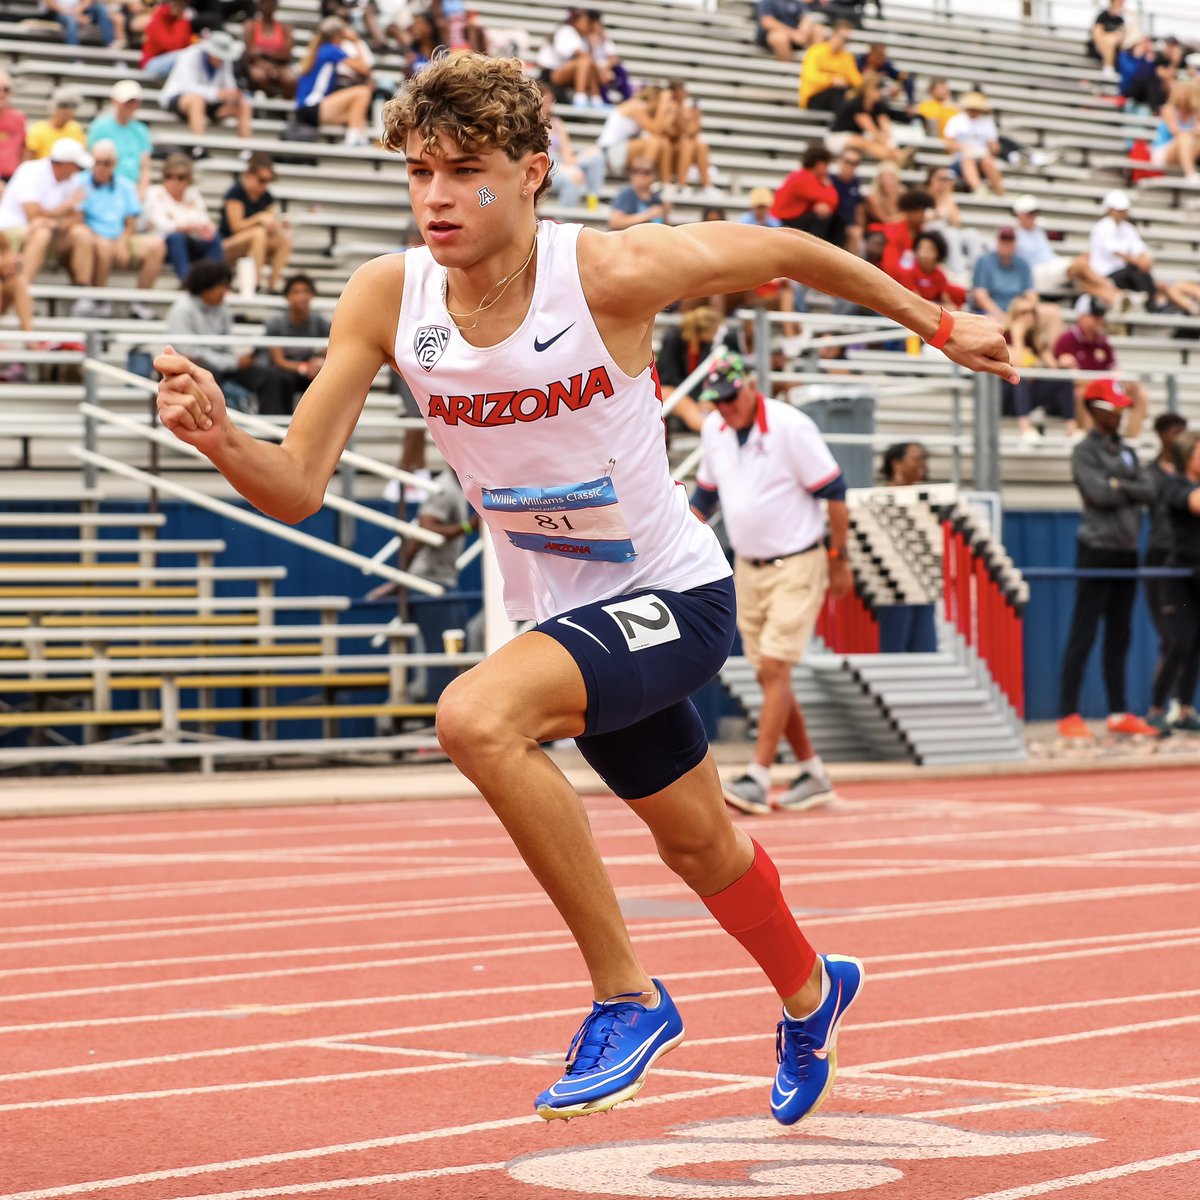 𝟒𝟎𝟎𝐌 𝐇𝐔𝐑𝐃𝐋𝐄𝐒 𝐅𝐈𝐍𝐀𝐋 Yan Vazquez places sixth in the men’s 400m hurdles with a time of 51.31! #BearDown | #BeLezoLike